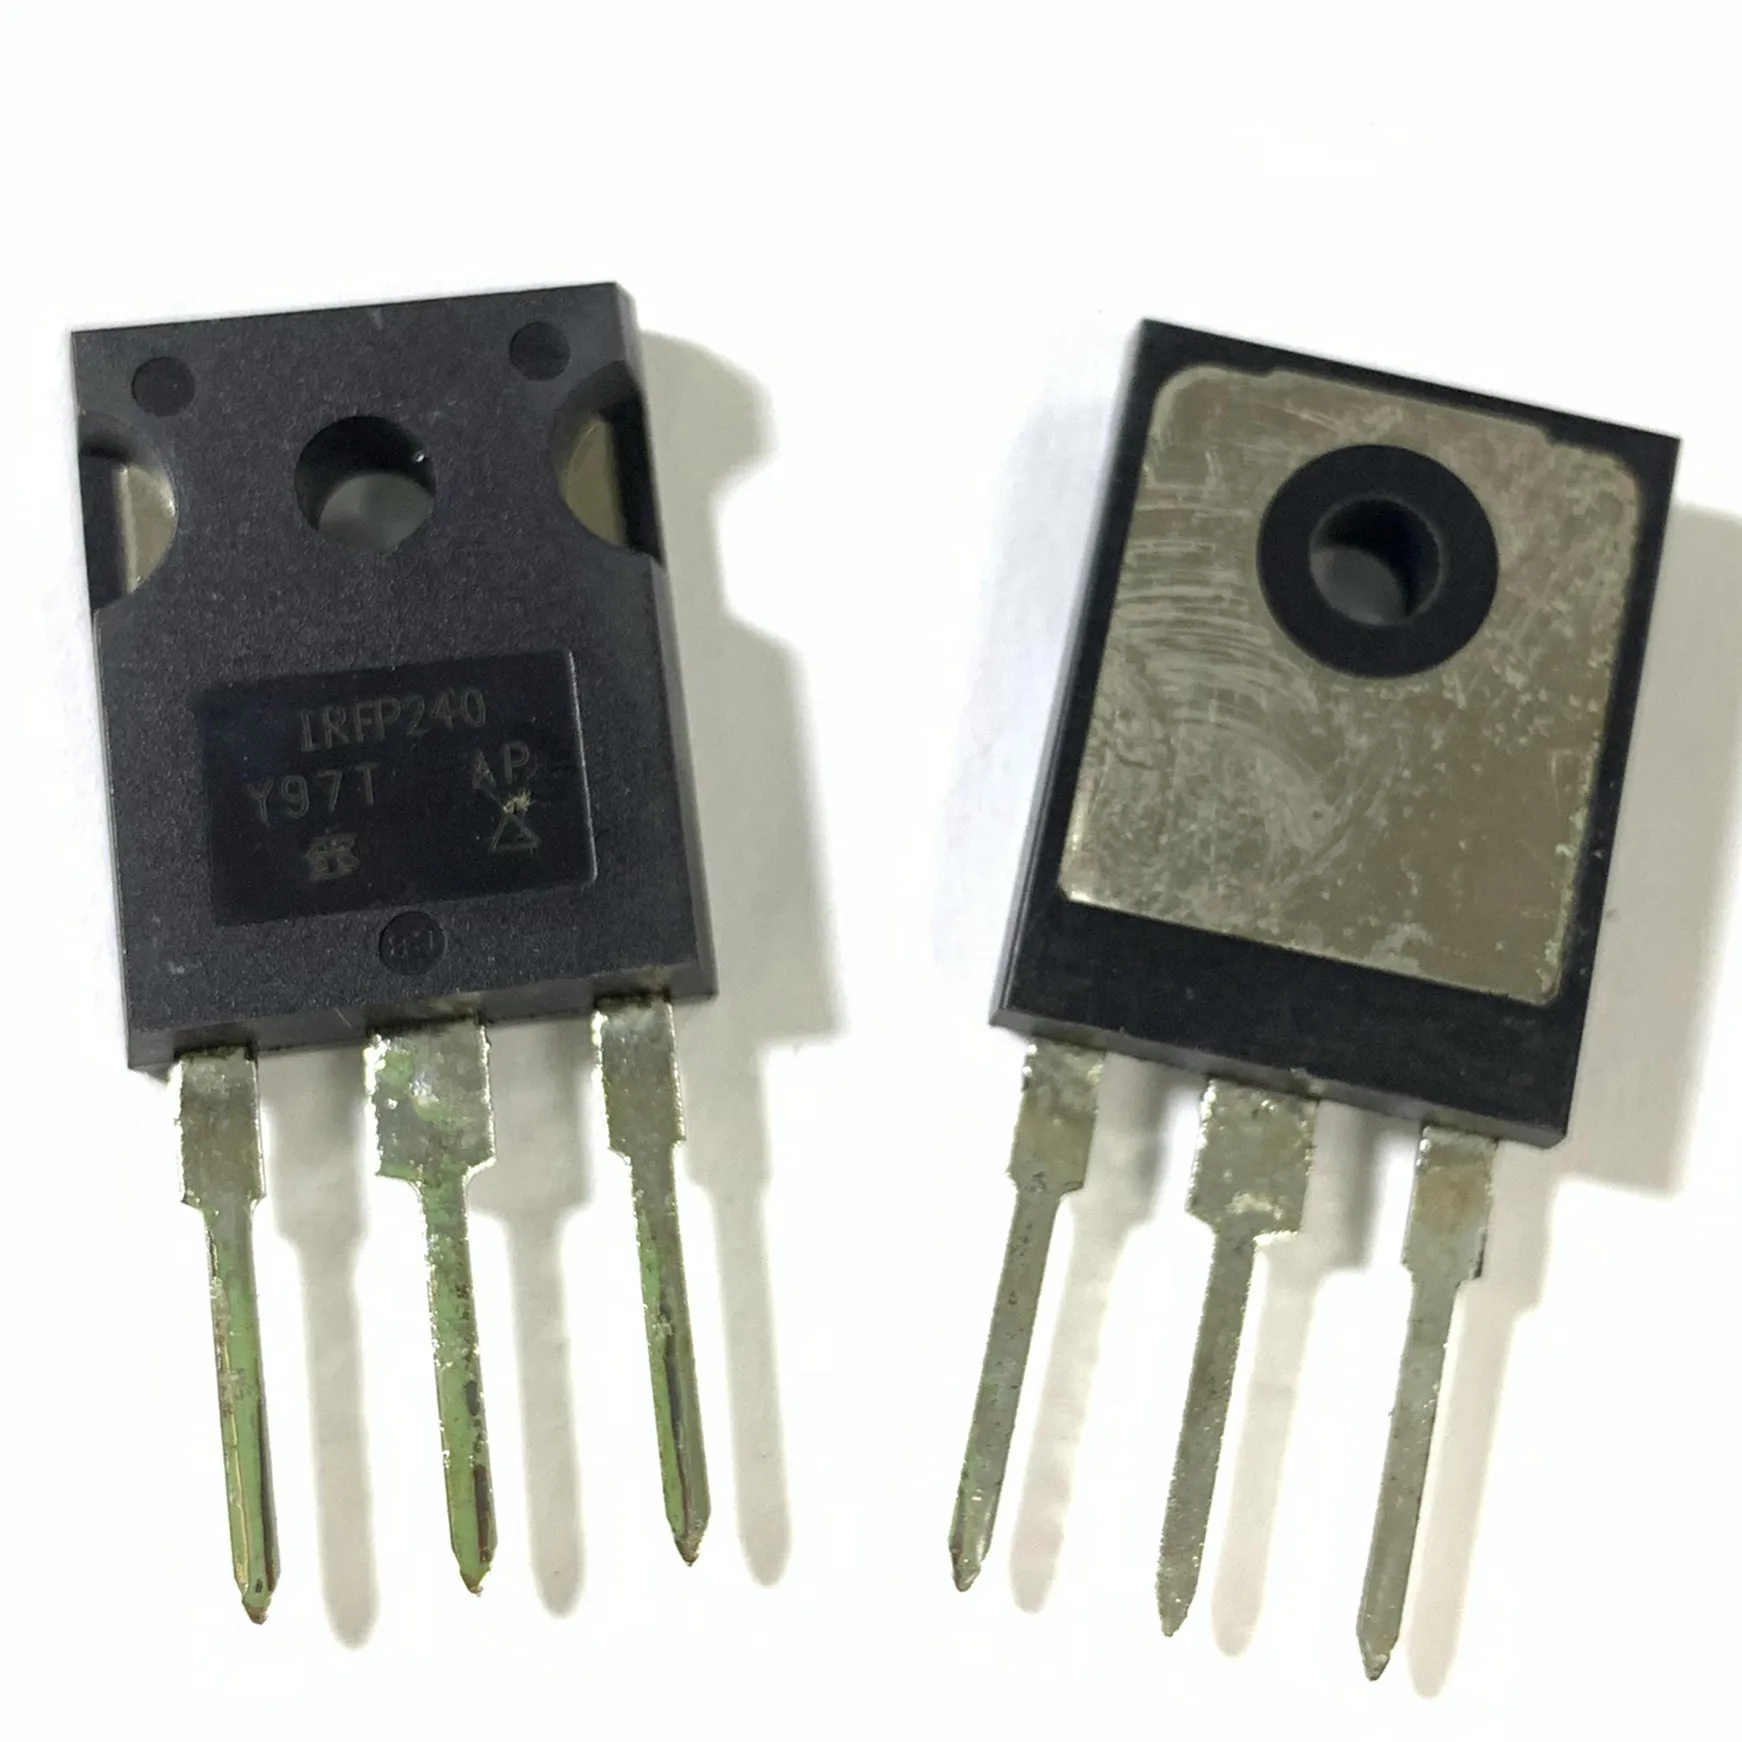 

IRFP240 Power Field-Effect Transistor, 20A I(D), 200V, 0.18ohm, 1-Element, N-Channel, Silicon, Metal-oxide Semiconductor FET, TO